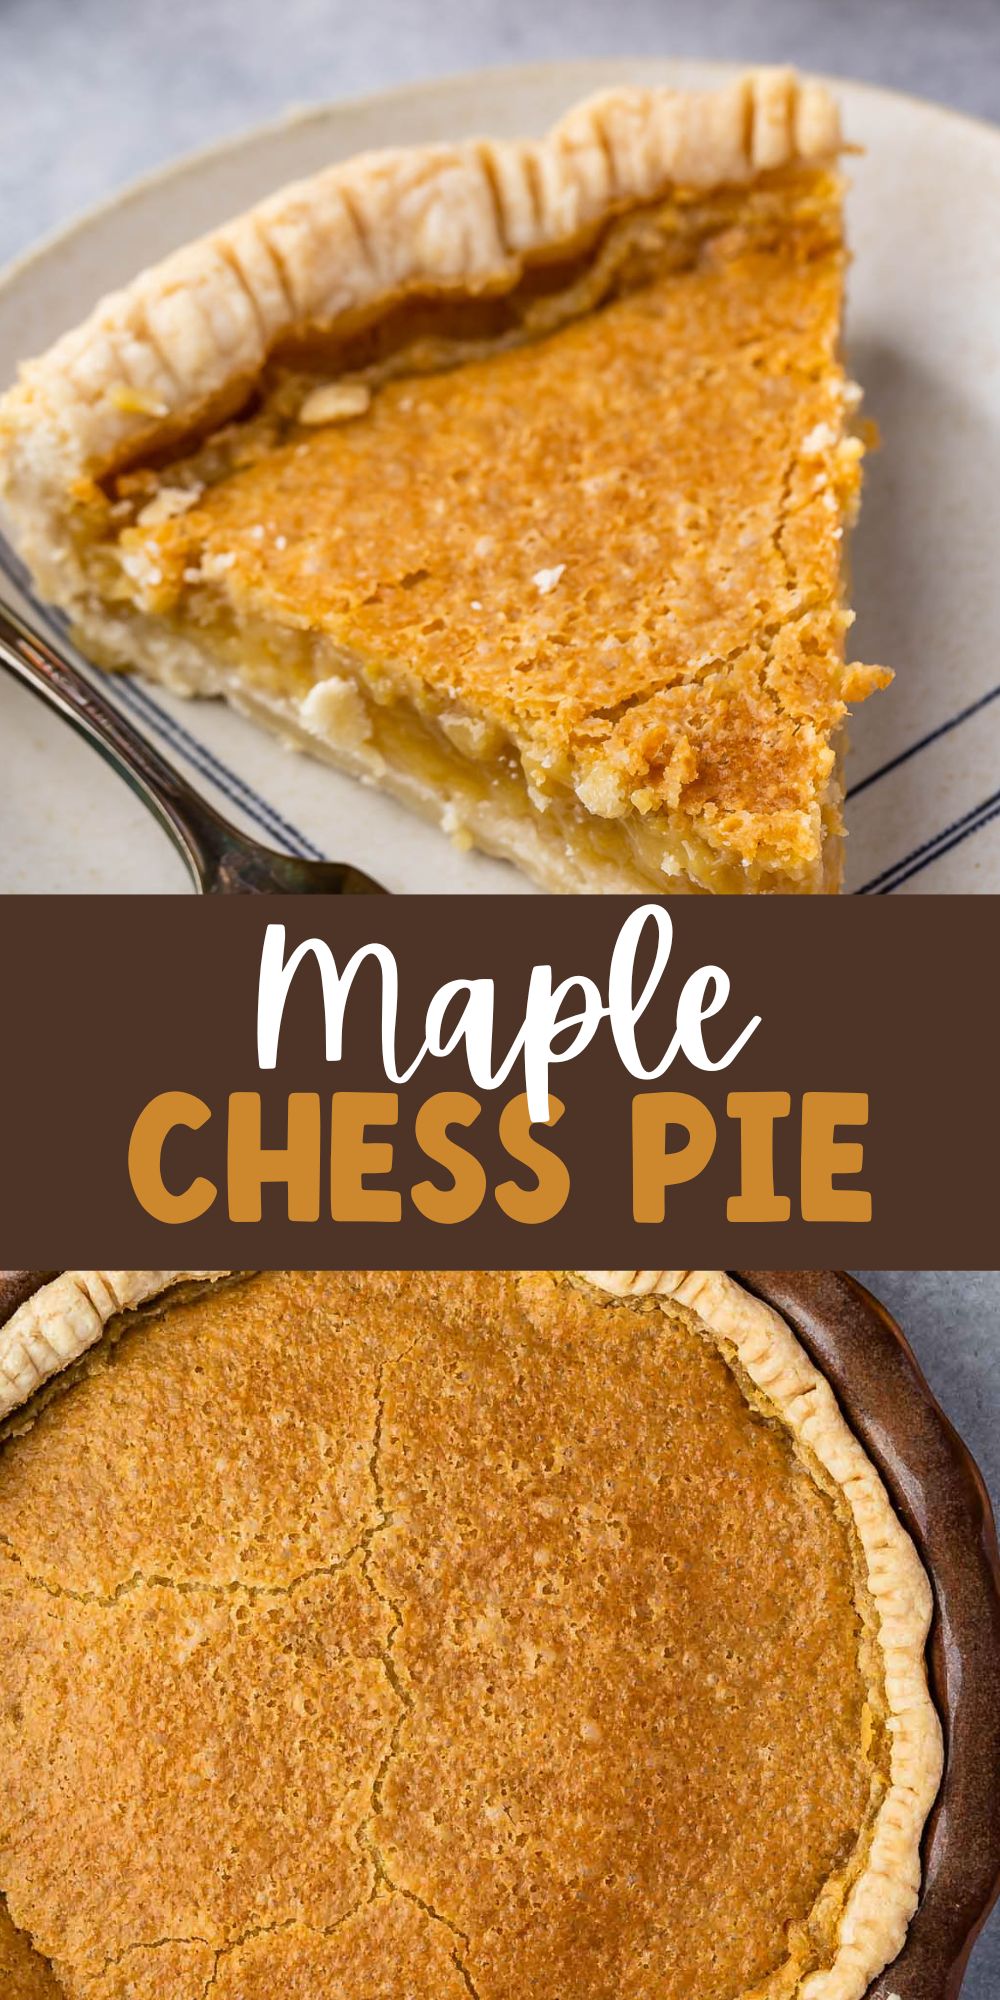 two photos of maple chess pie on a tan plate next to a fork